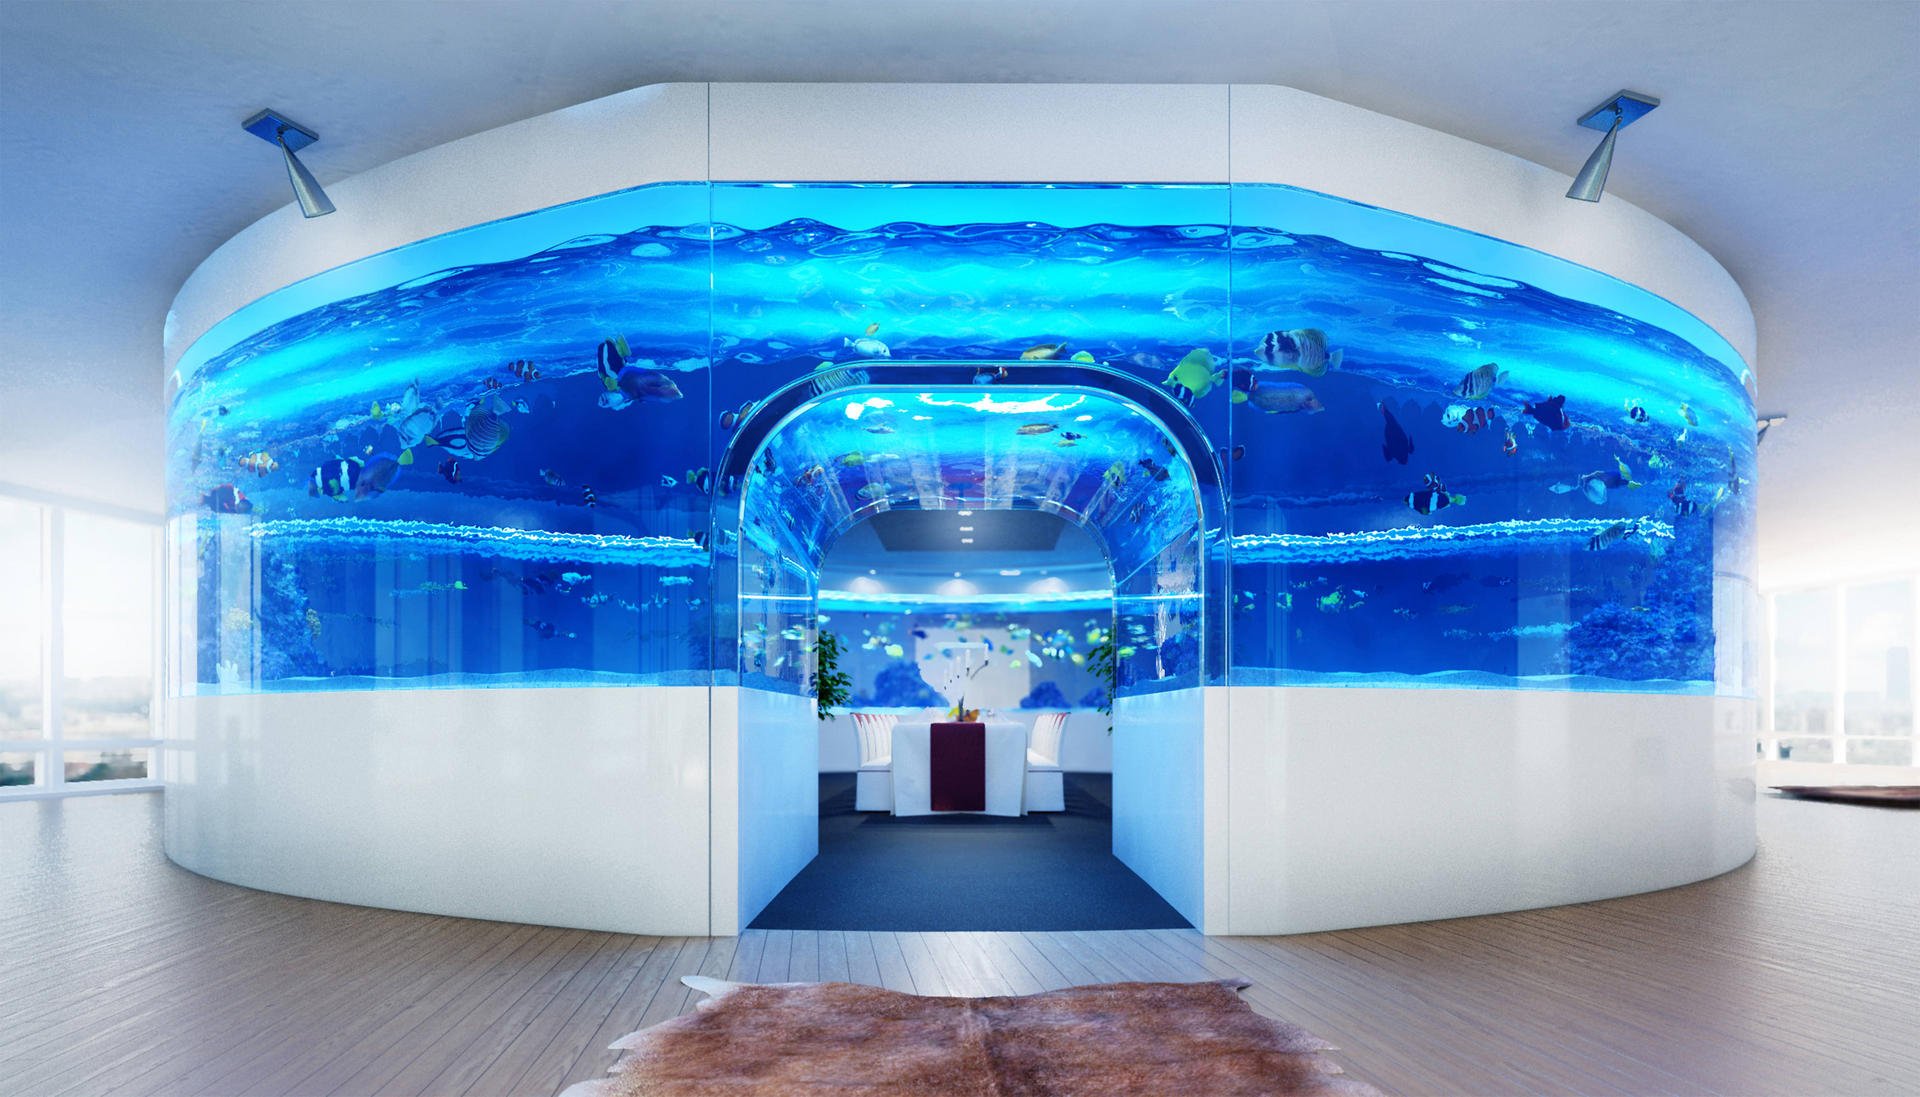 The aquarium is designed with a room inside so the owner can feel like they are surrounded by the ocean. There is enough floor space inside for dinner parties and dancing.